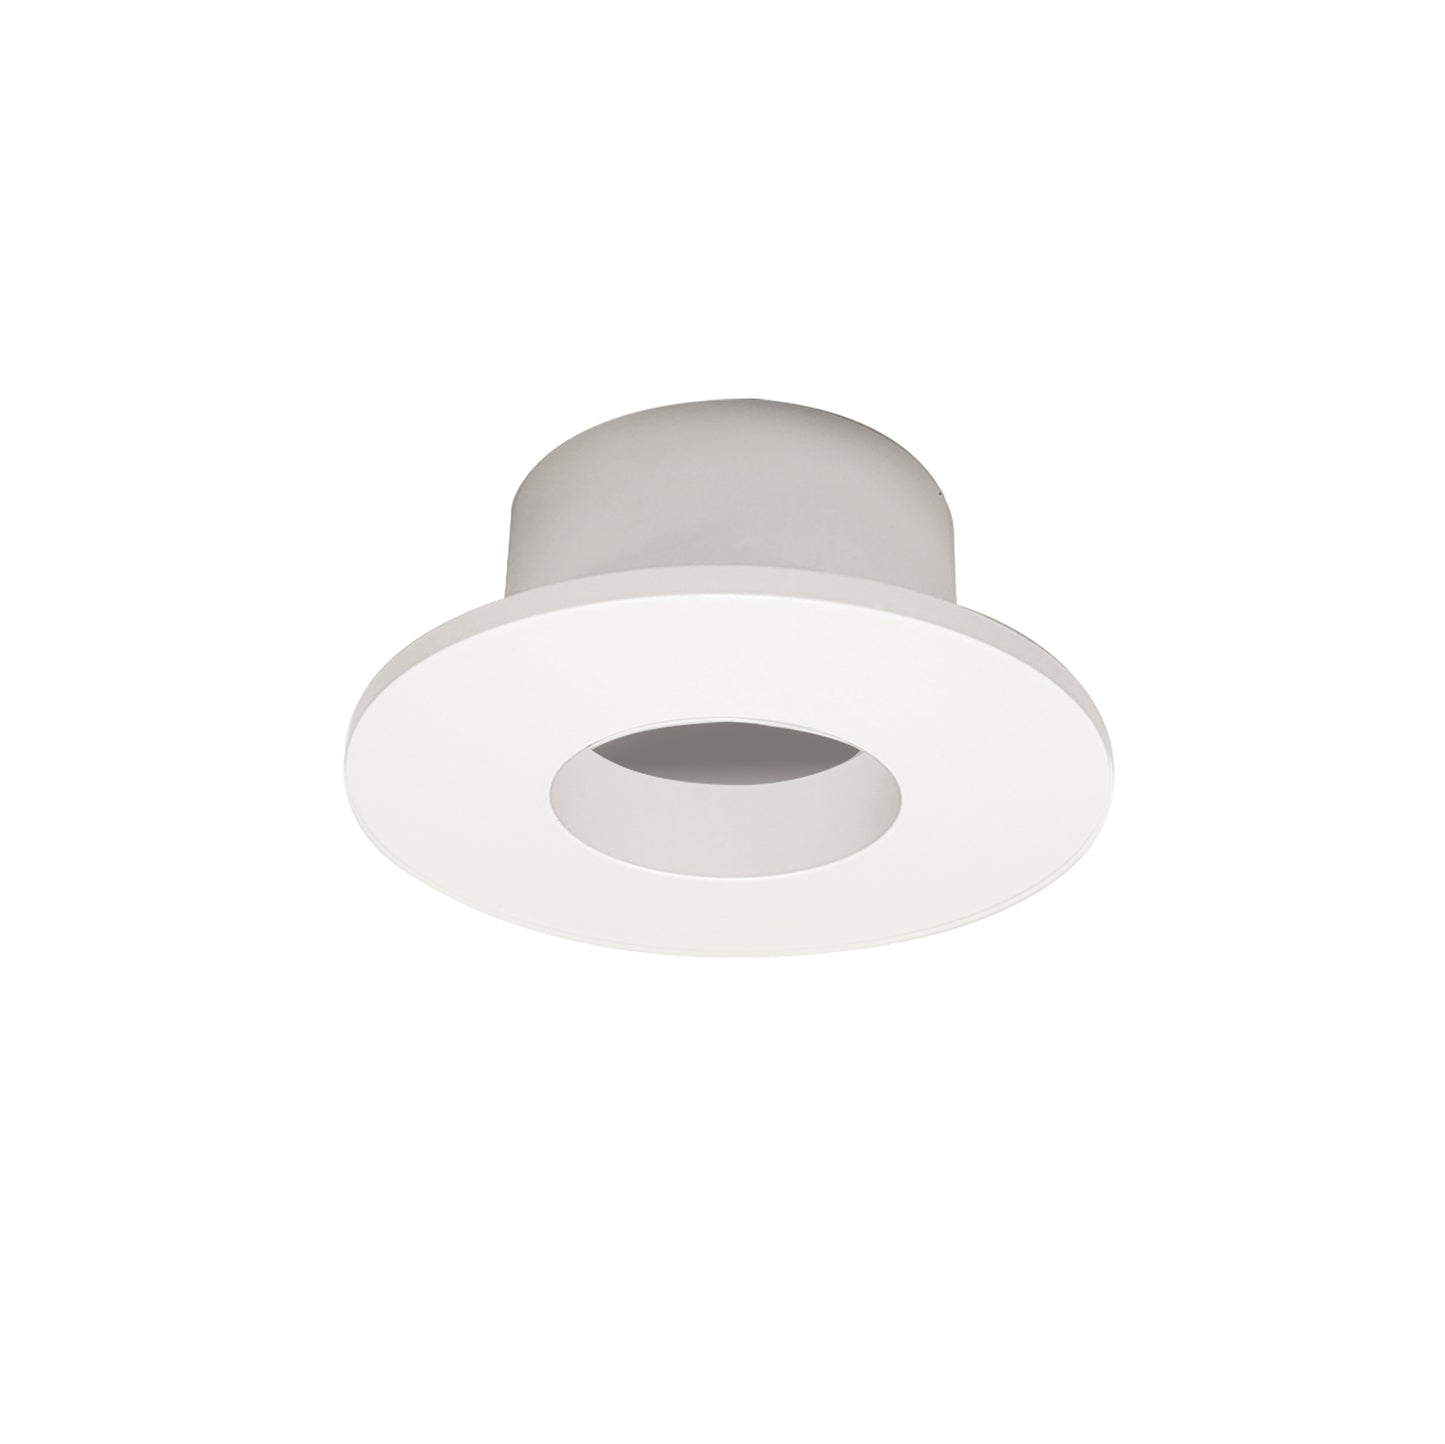 1-Inch Nora Lighting Iolite LED Recessed Downlight Trim -  Can-less Round Fixture 4